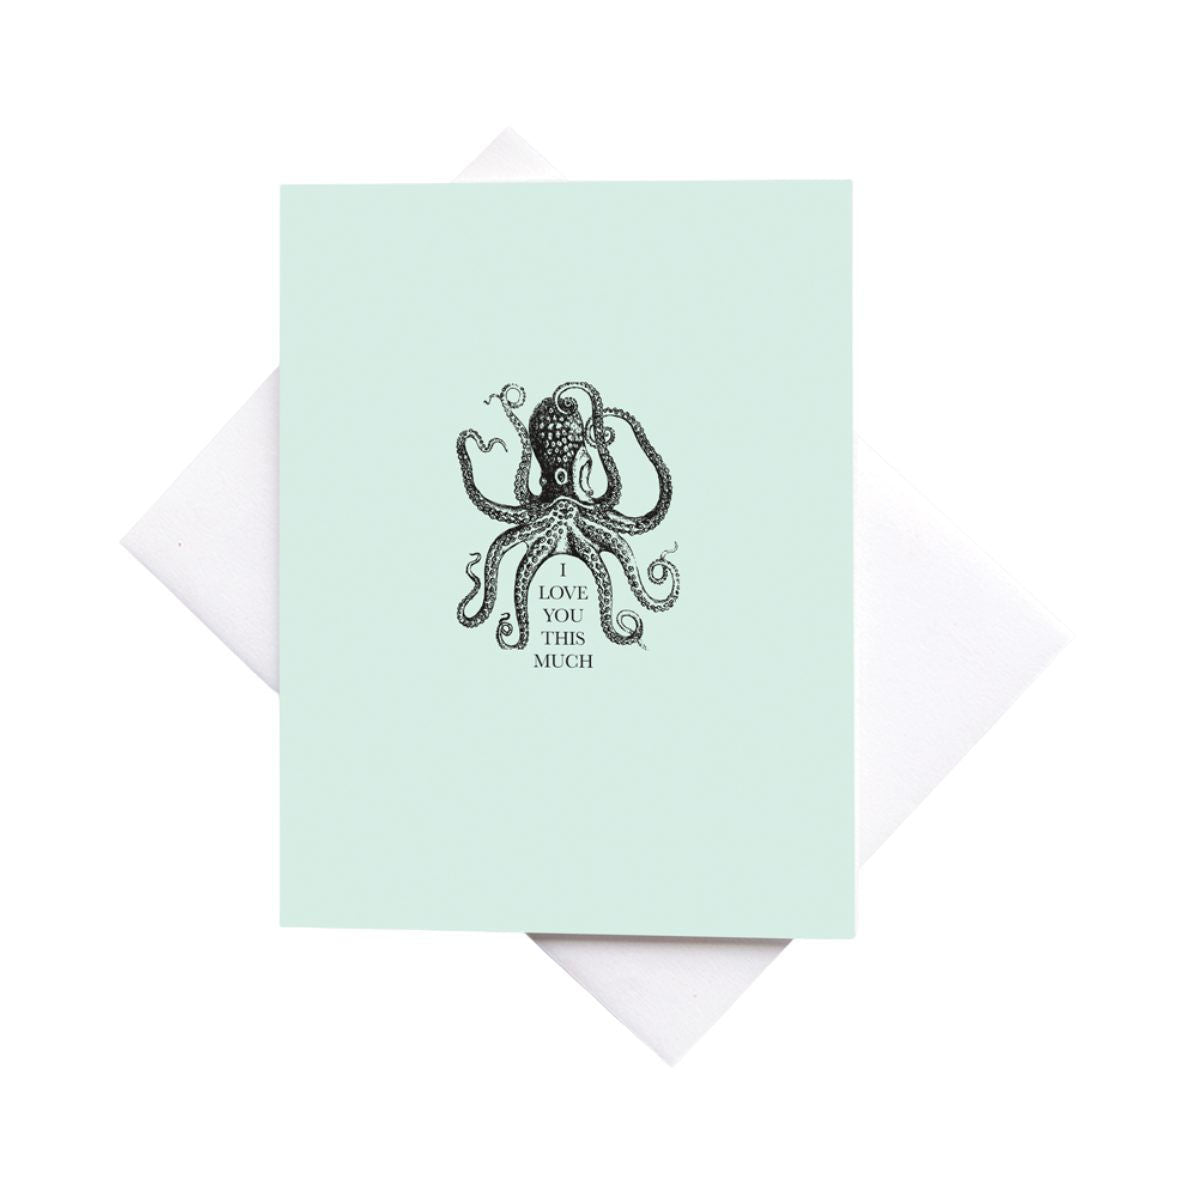 Cardideology Greeting Cards - Love You This Much